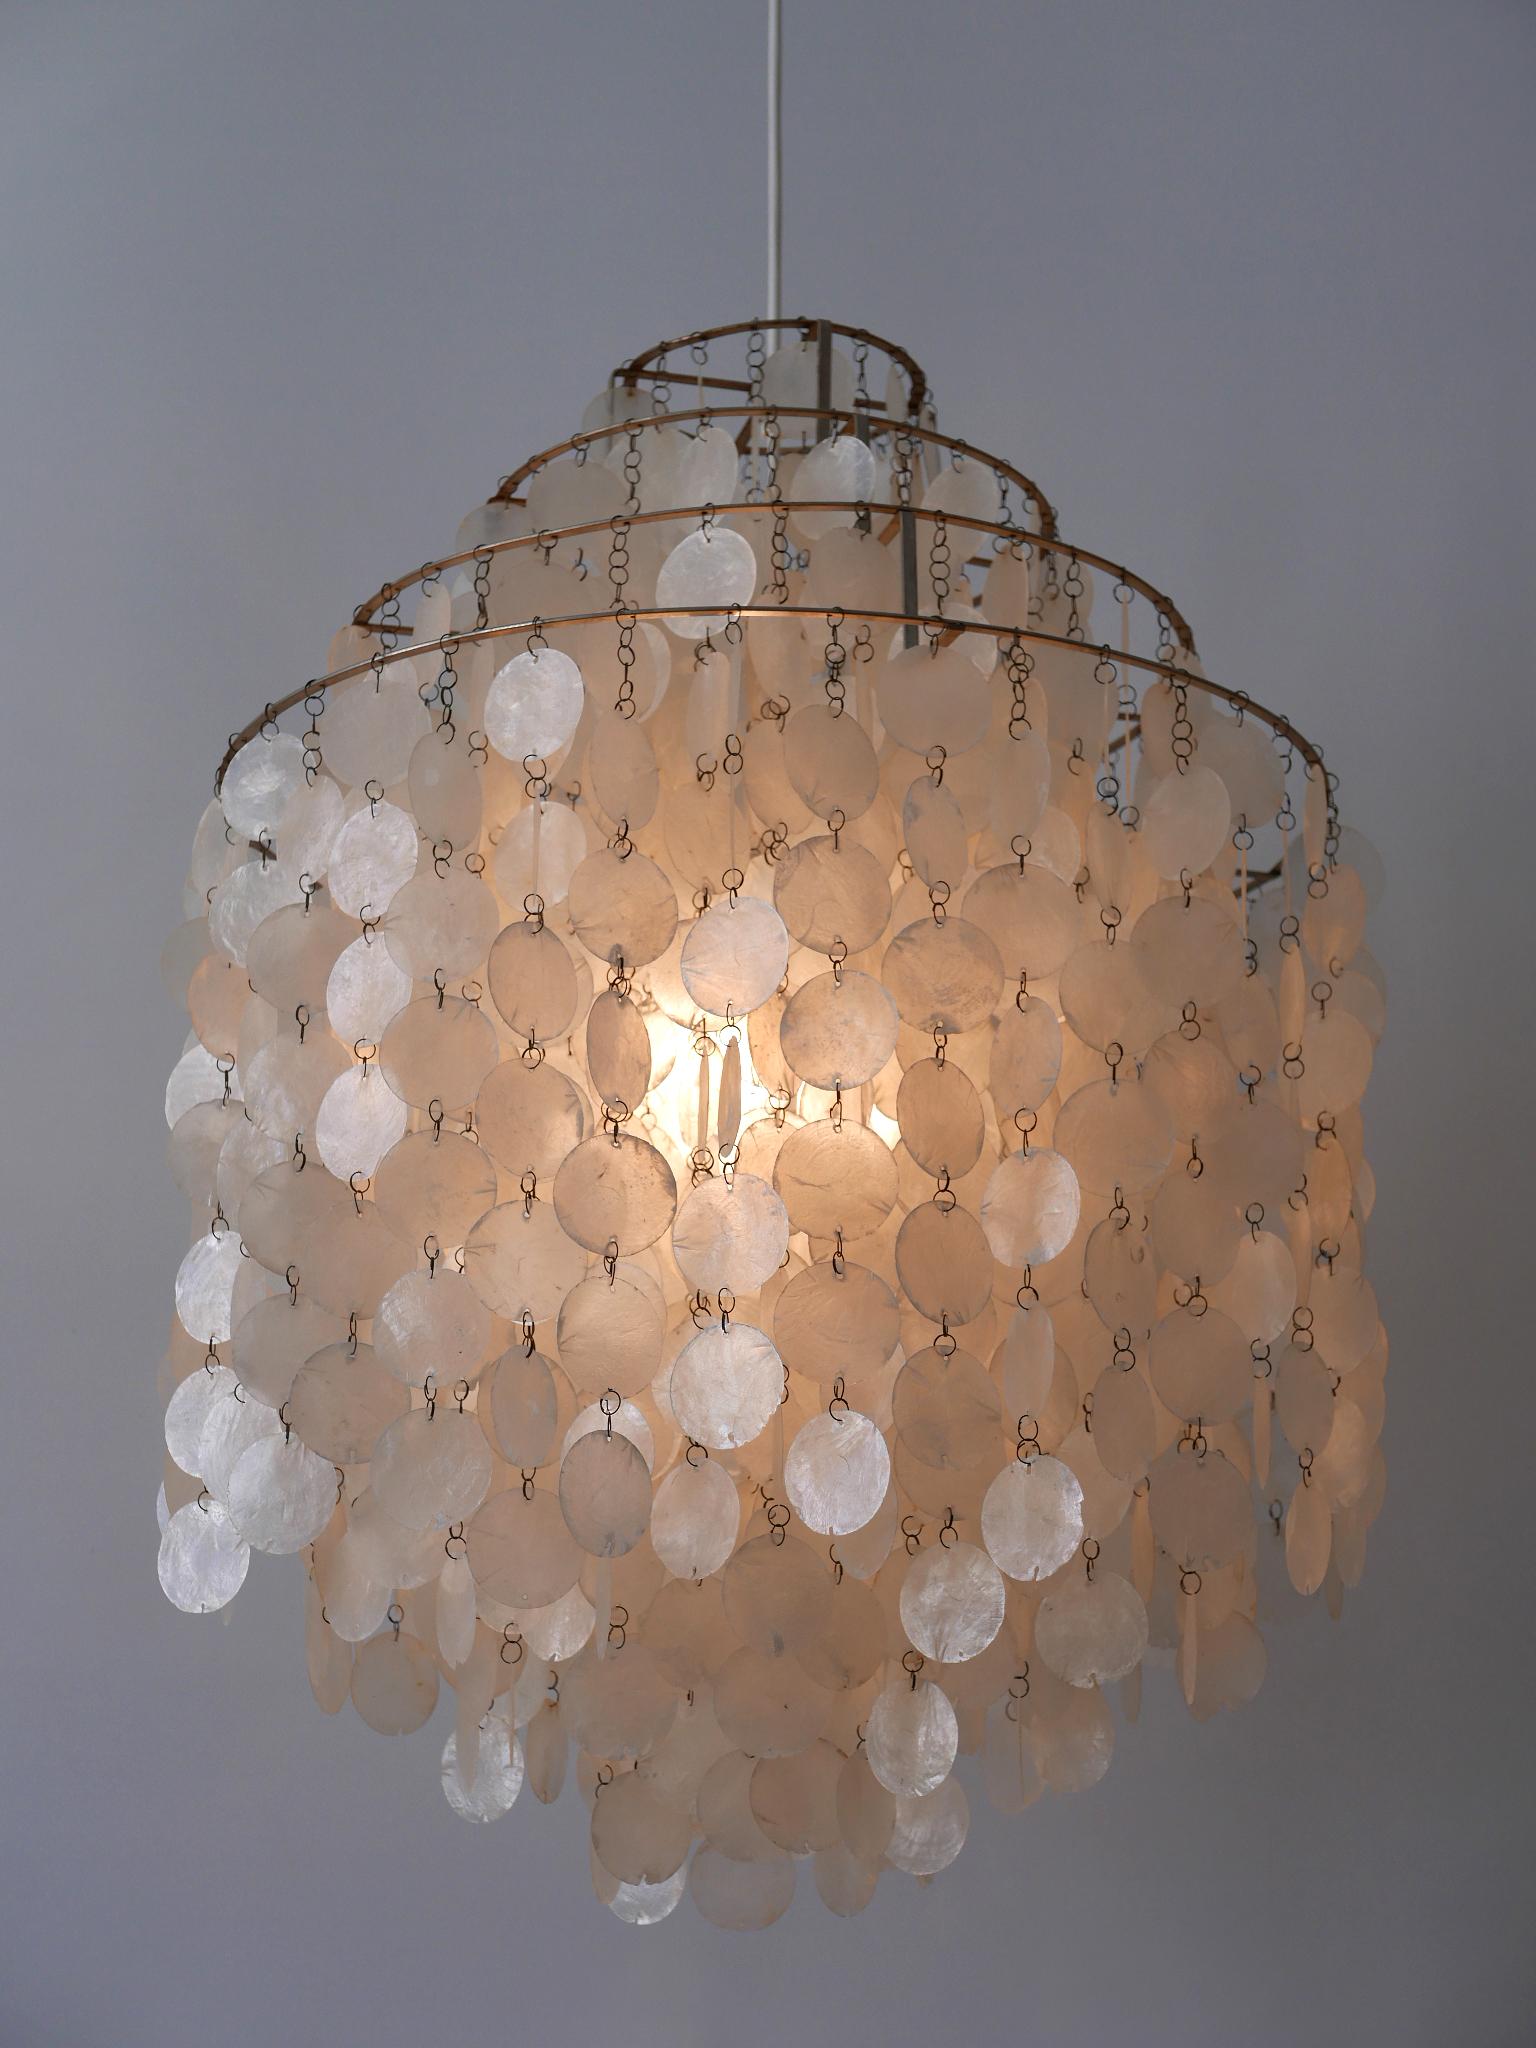 Early Pendant Lamp or Chandelier FUN 0DM by Verner Panton for Lüber CH 1960s For Sale 5